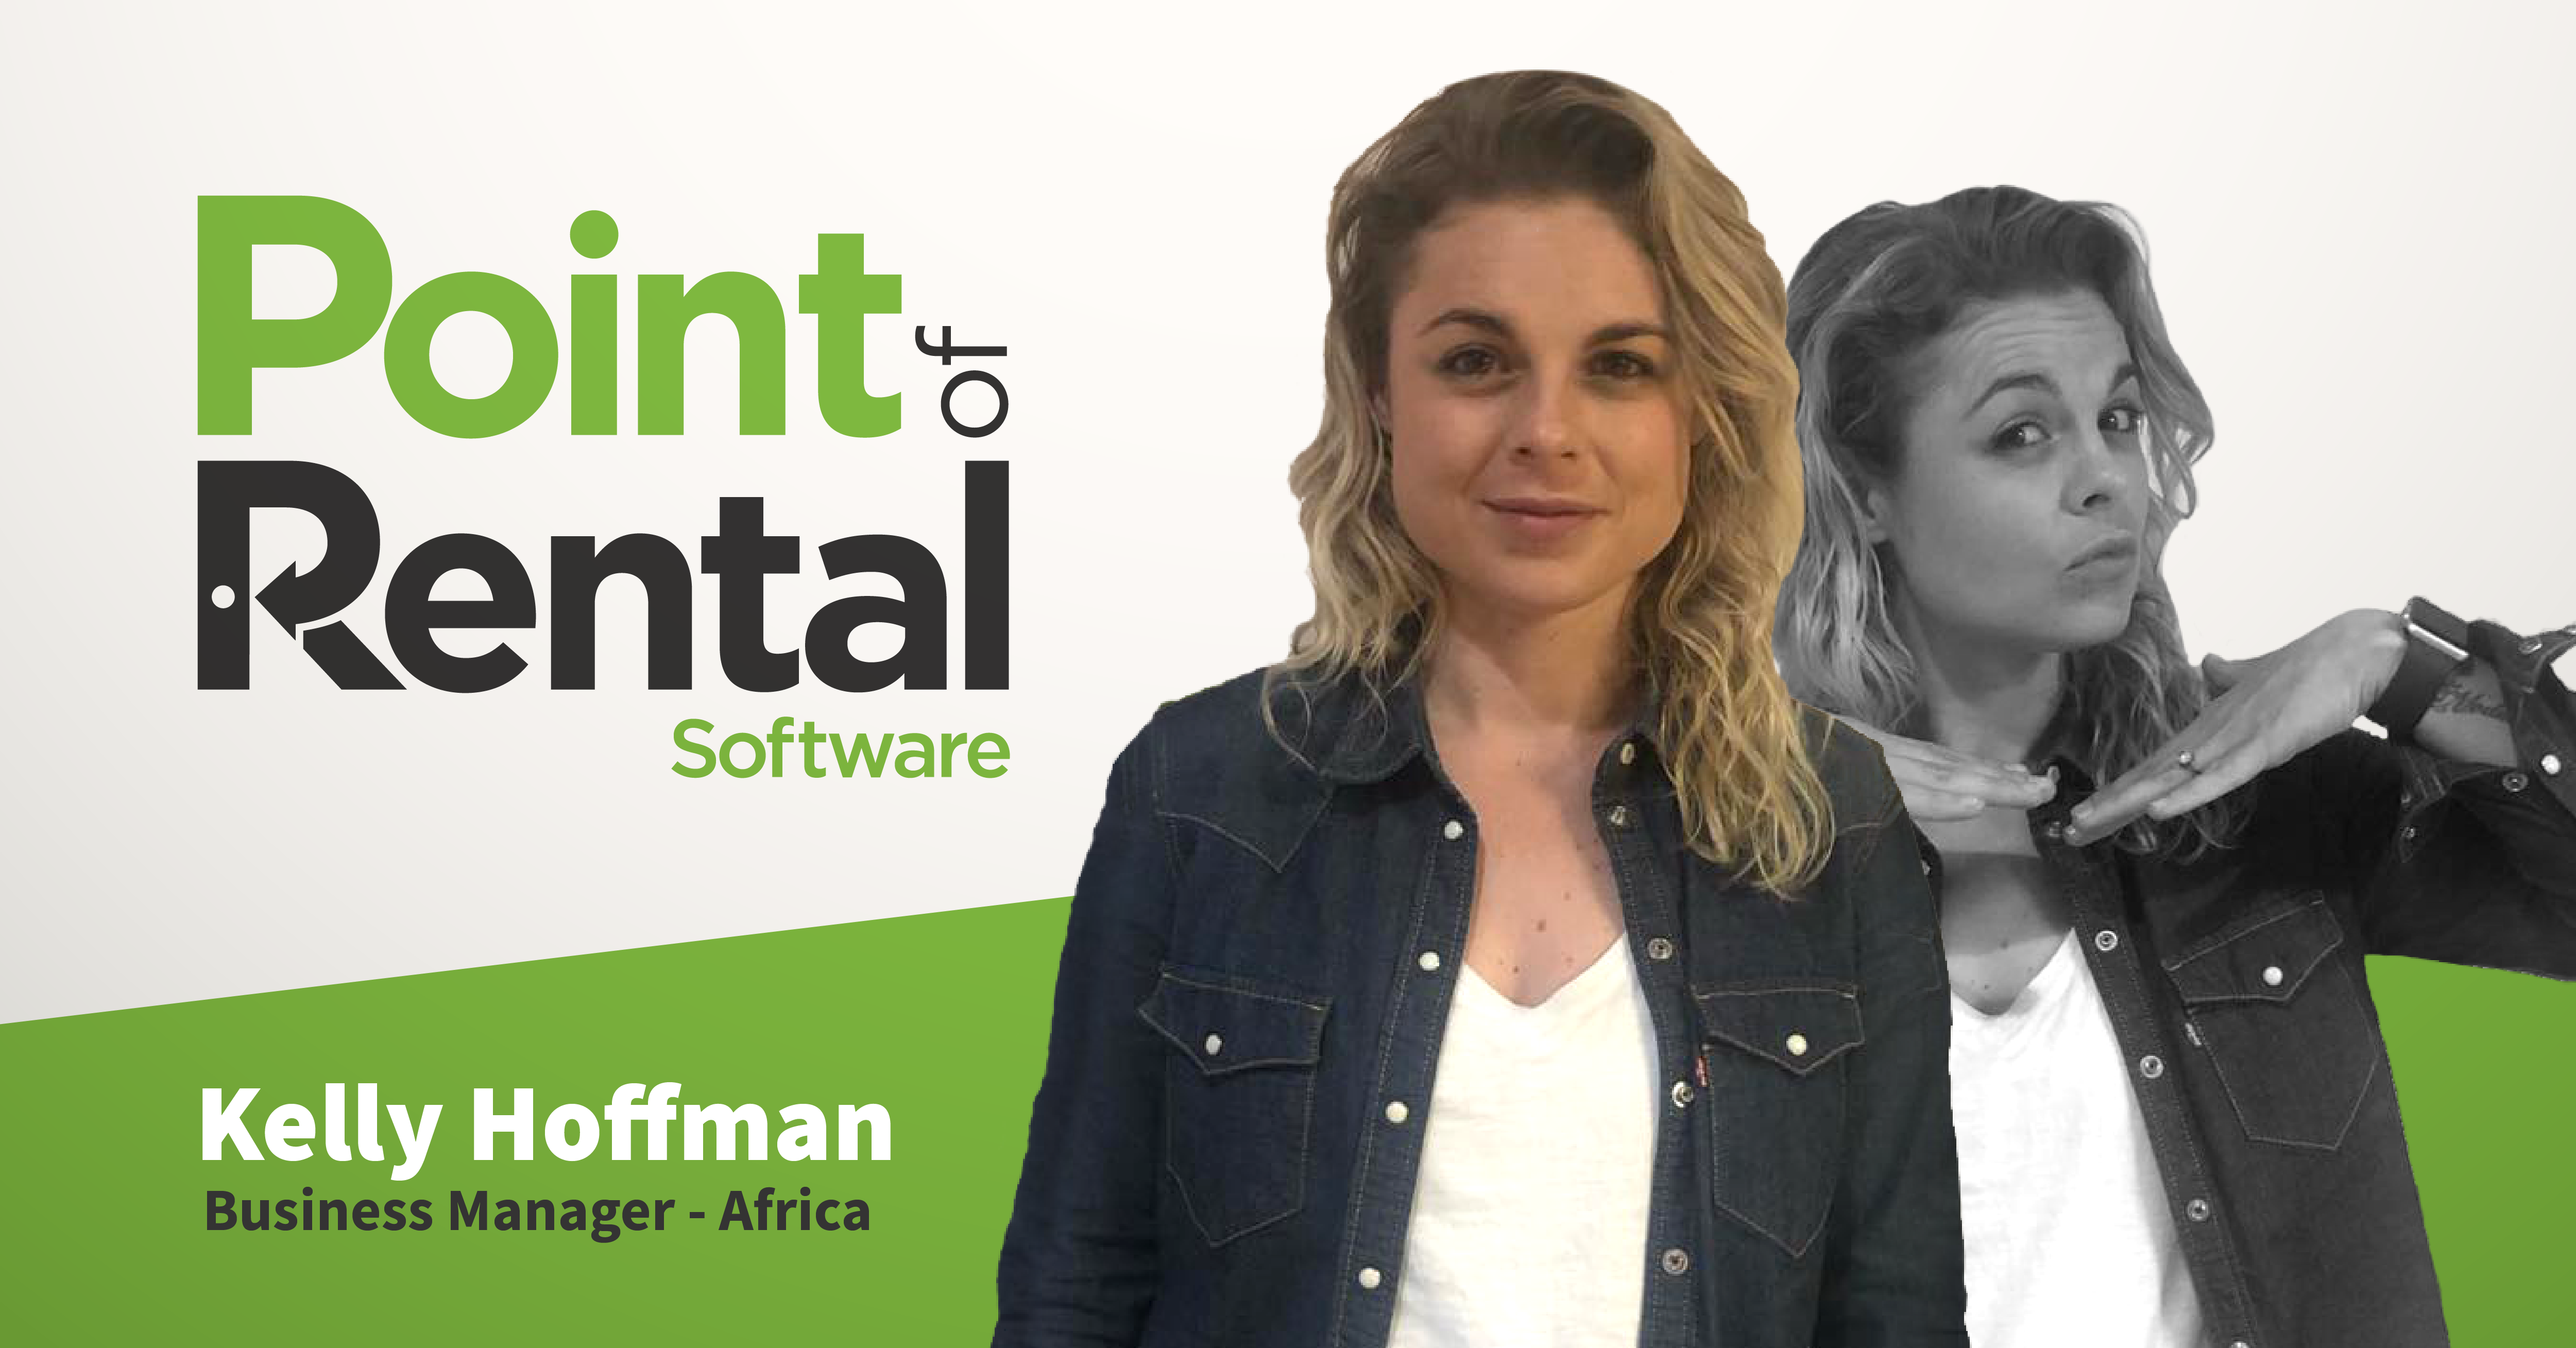 Kelly Hoffman is Point of Rental's new Business Manager on the African continent.